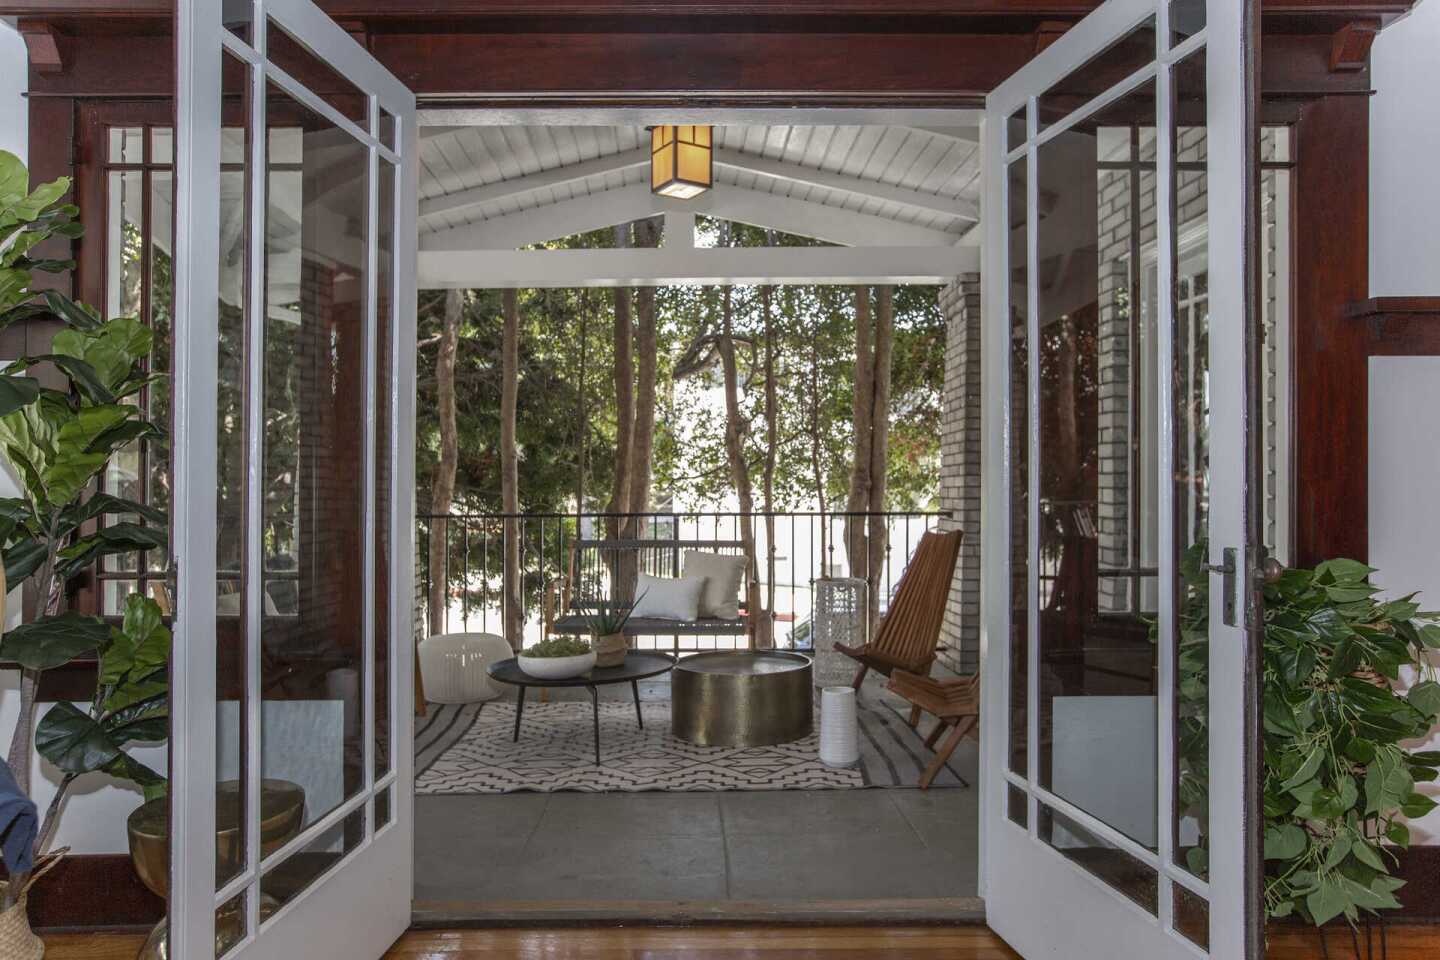 French doors open to a side patio.